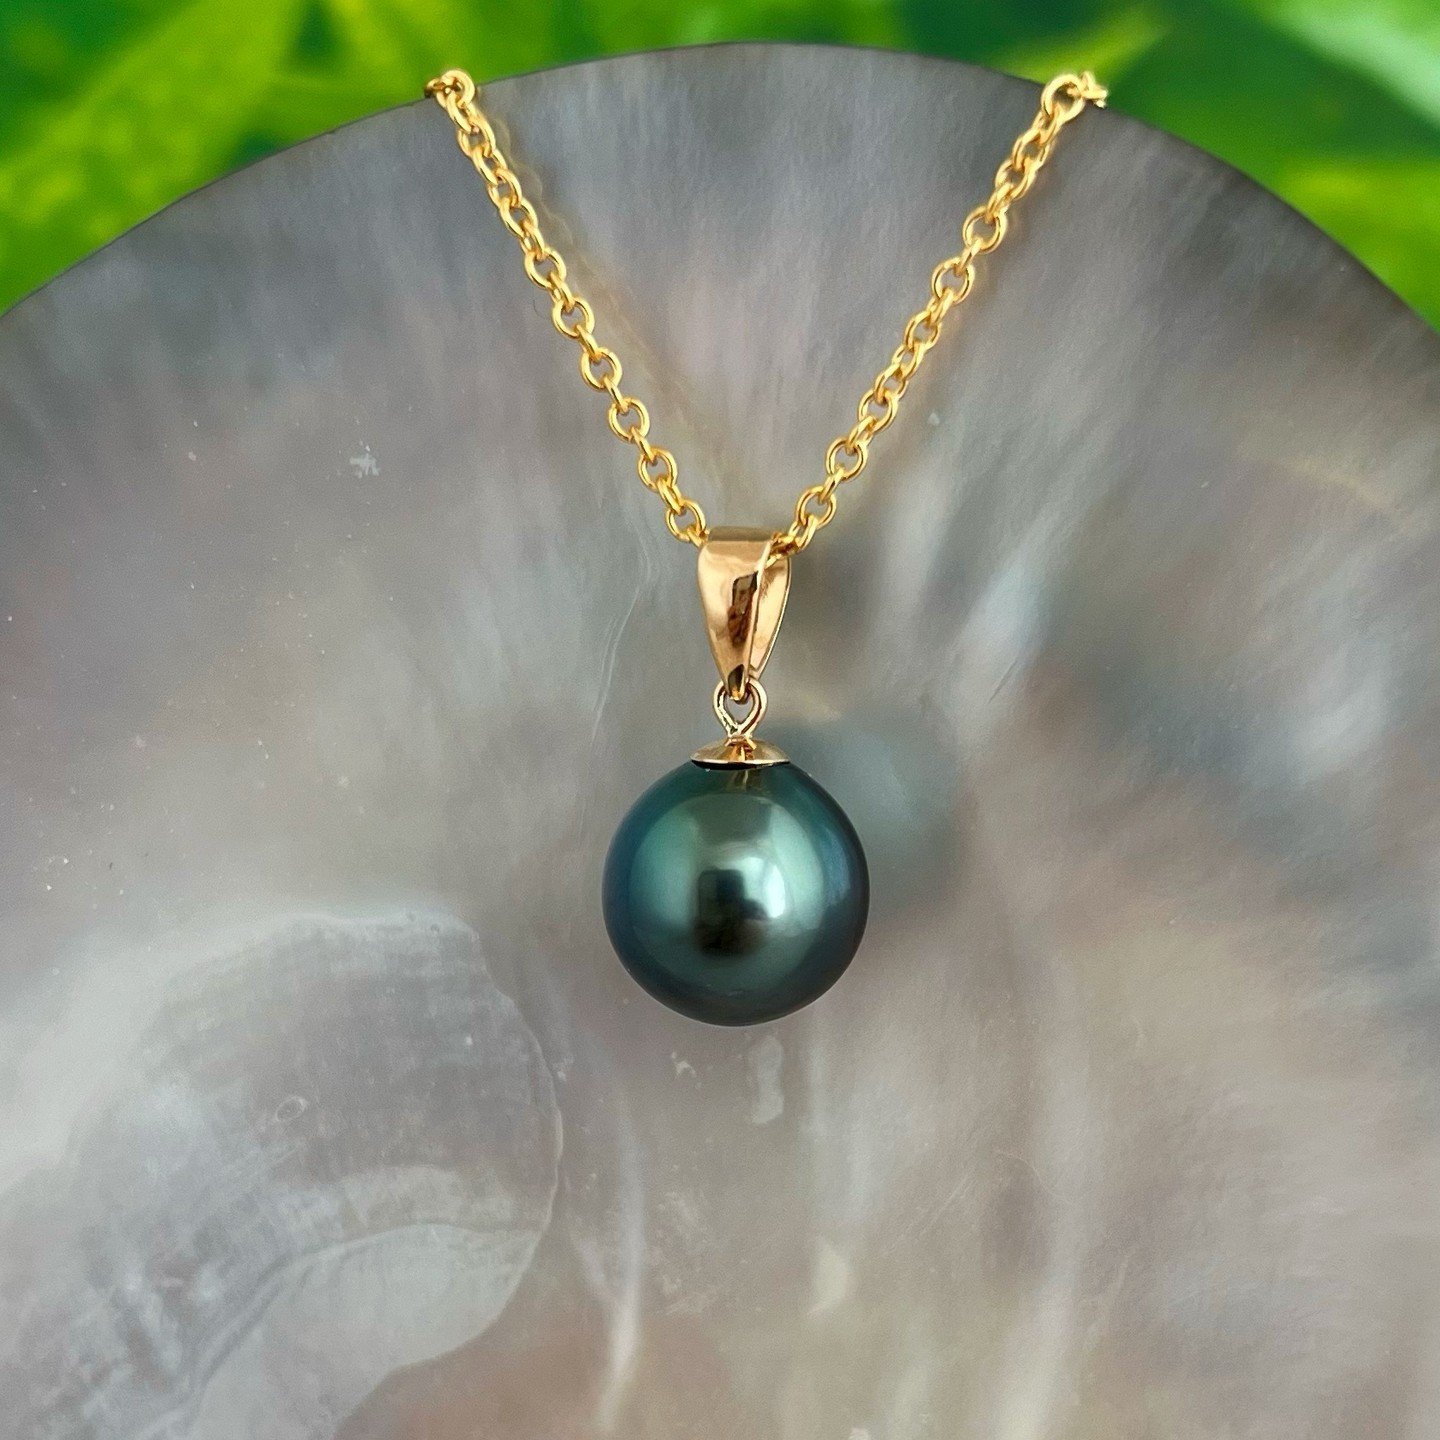 𝐎𝐜𝐞𝐚𝐧 𝐁𝐥𝐮𝐞 🌊

As the ocean's depths embrace the surface with a radiant glow, this pearl embodies the magic of hidden wonders, enchanting all who catch sight of its shimmering charm.

#tahitianpearlnecklace #tahitianpearl #tahitianpearls